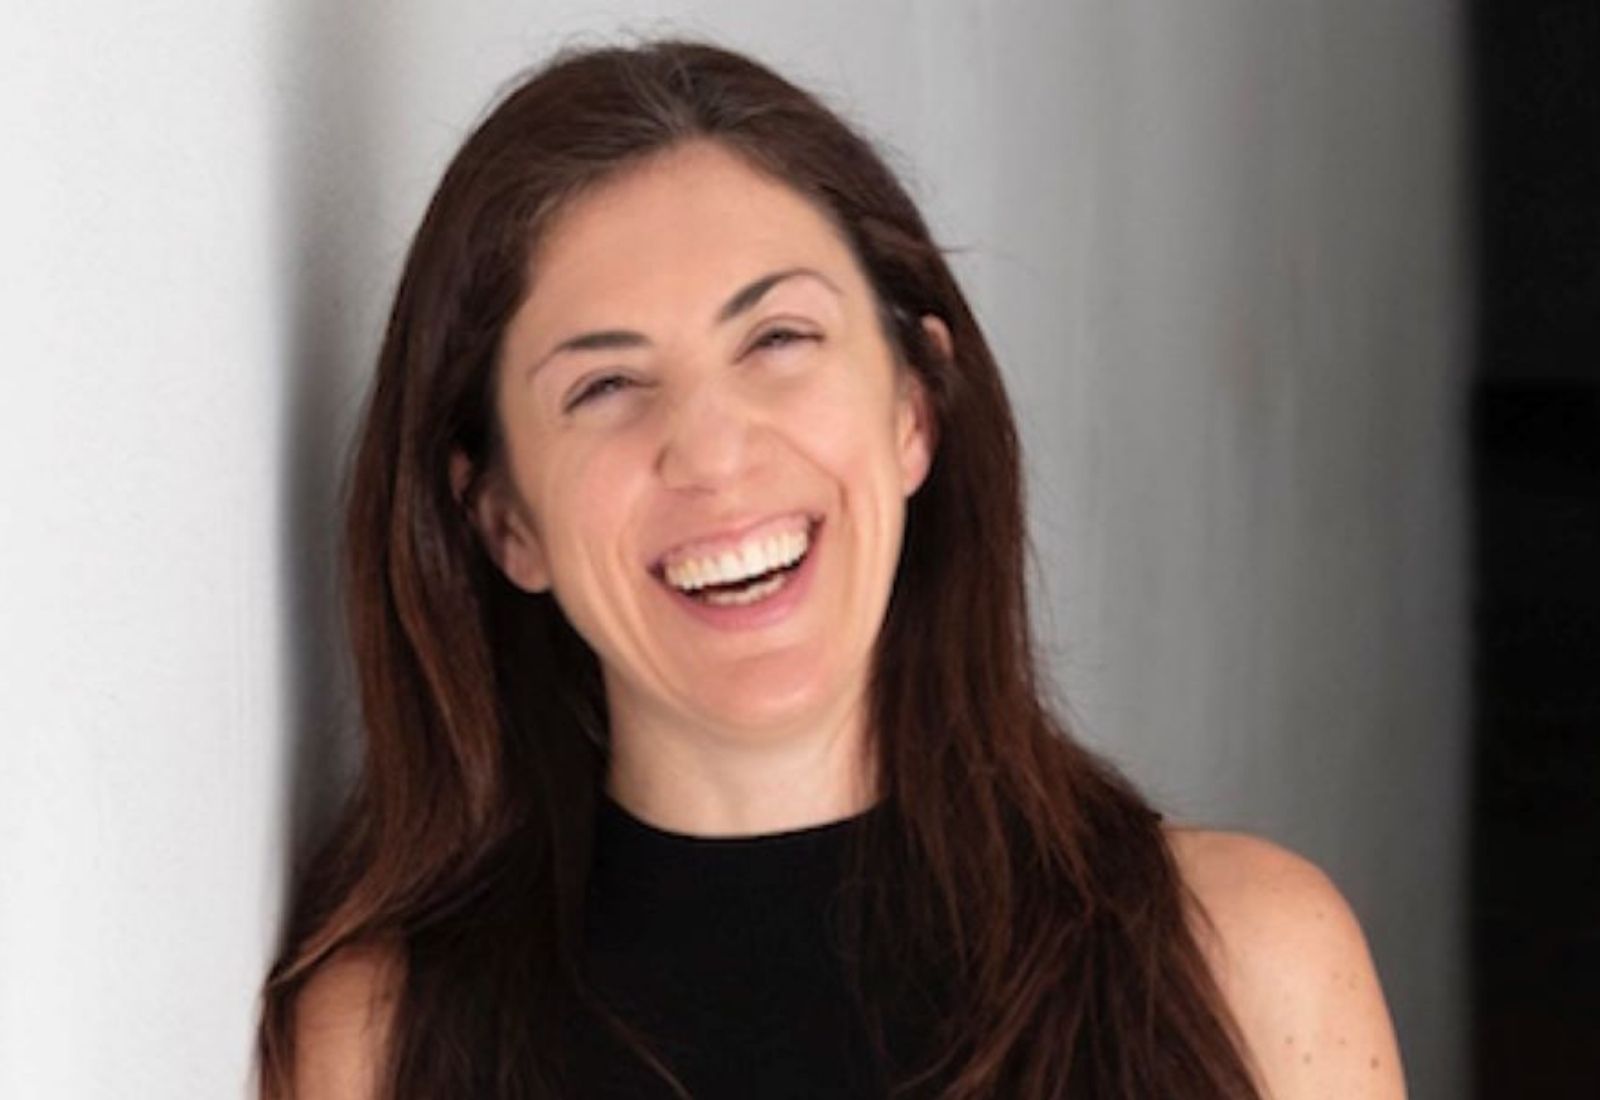 Nikki Chrysostomou of Movement Integration: How To Successfully Ride The Emotional Highs & Lows Of Being An Entrepreneur